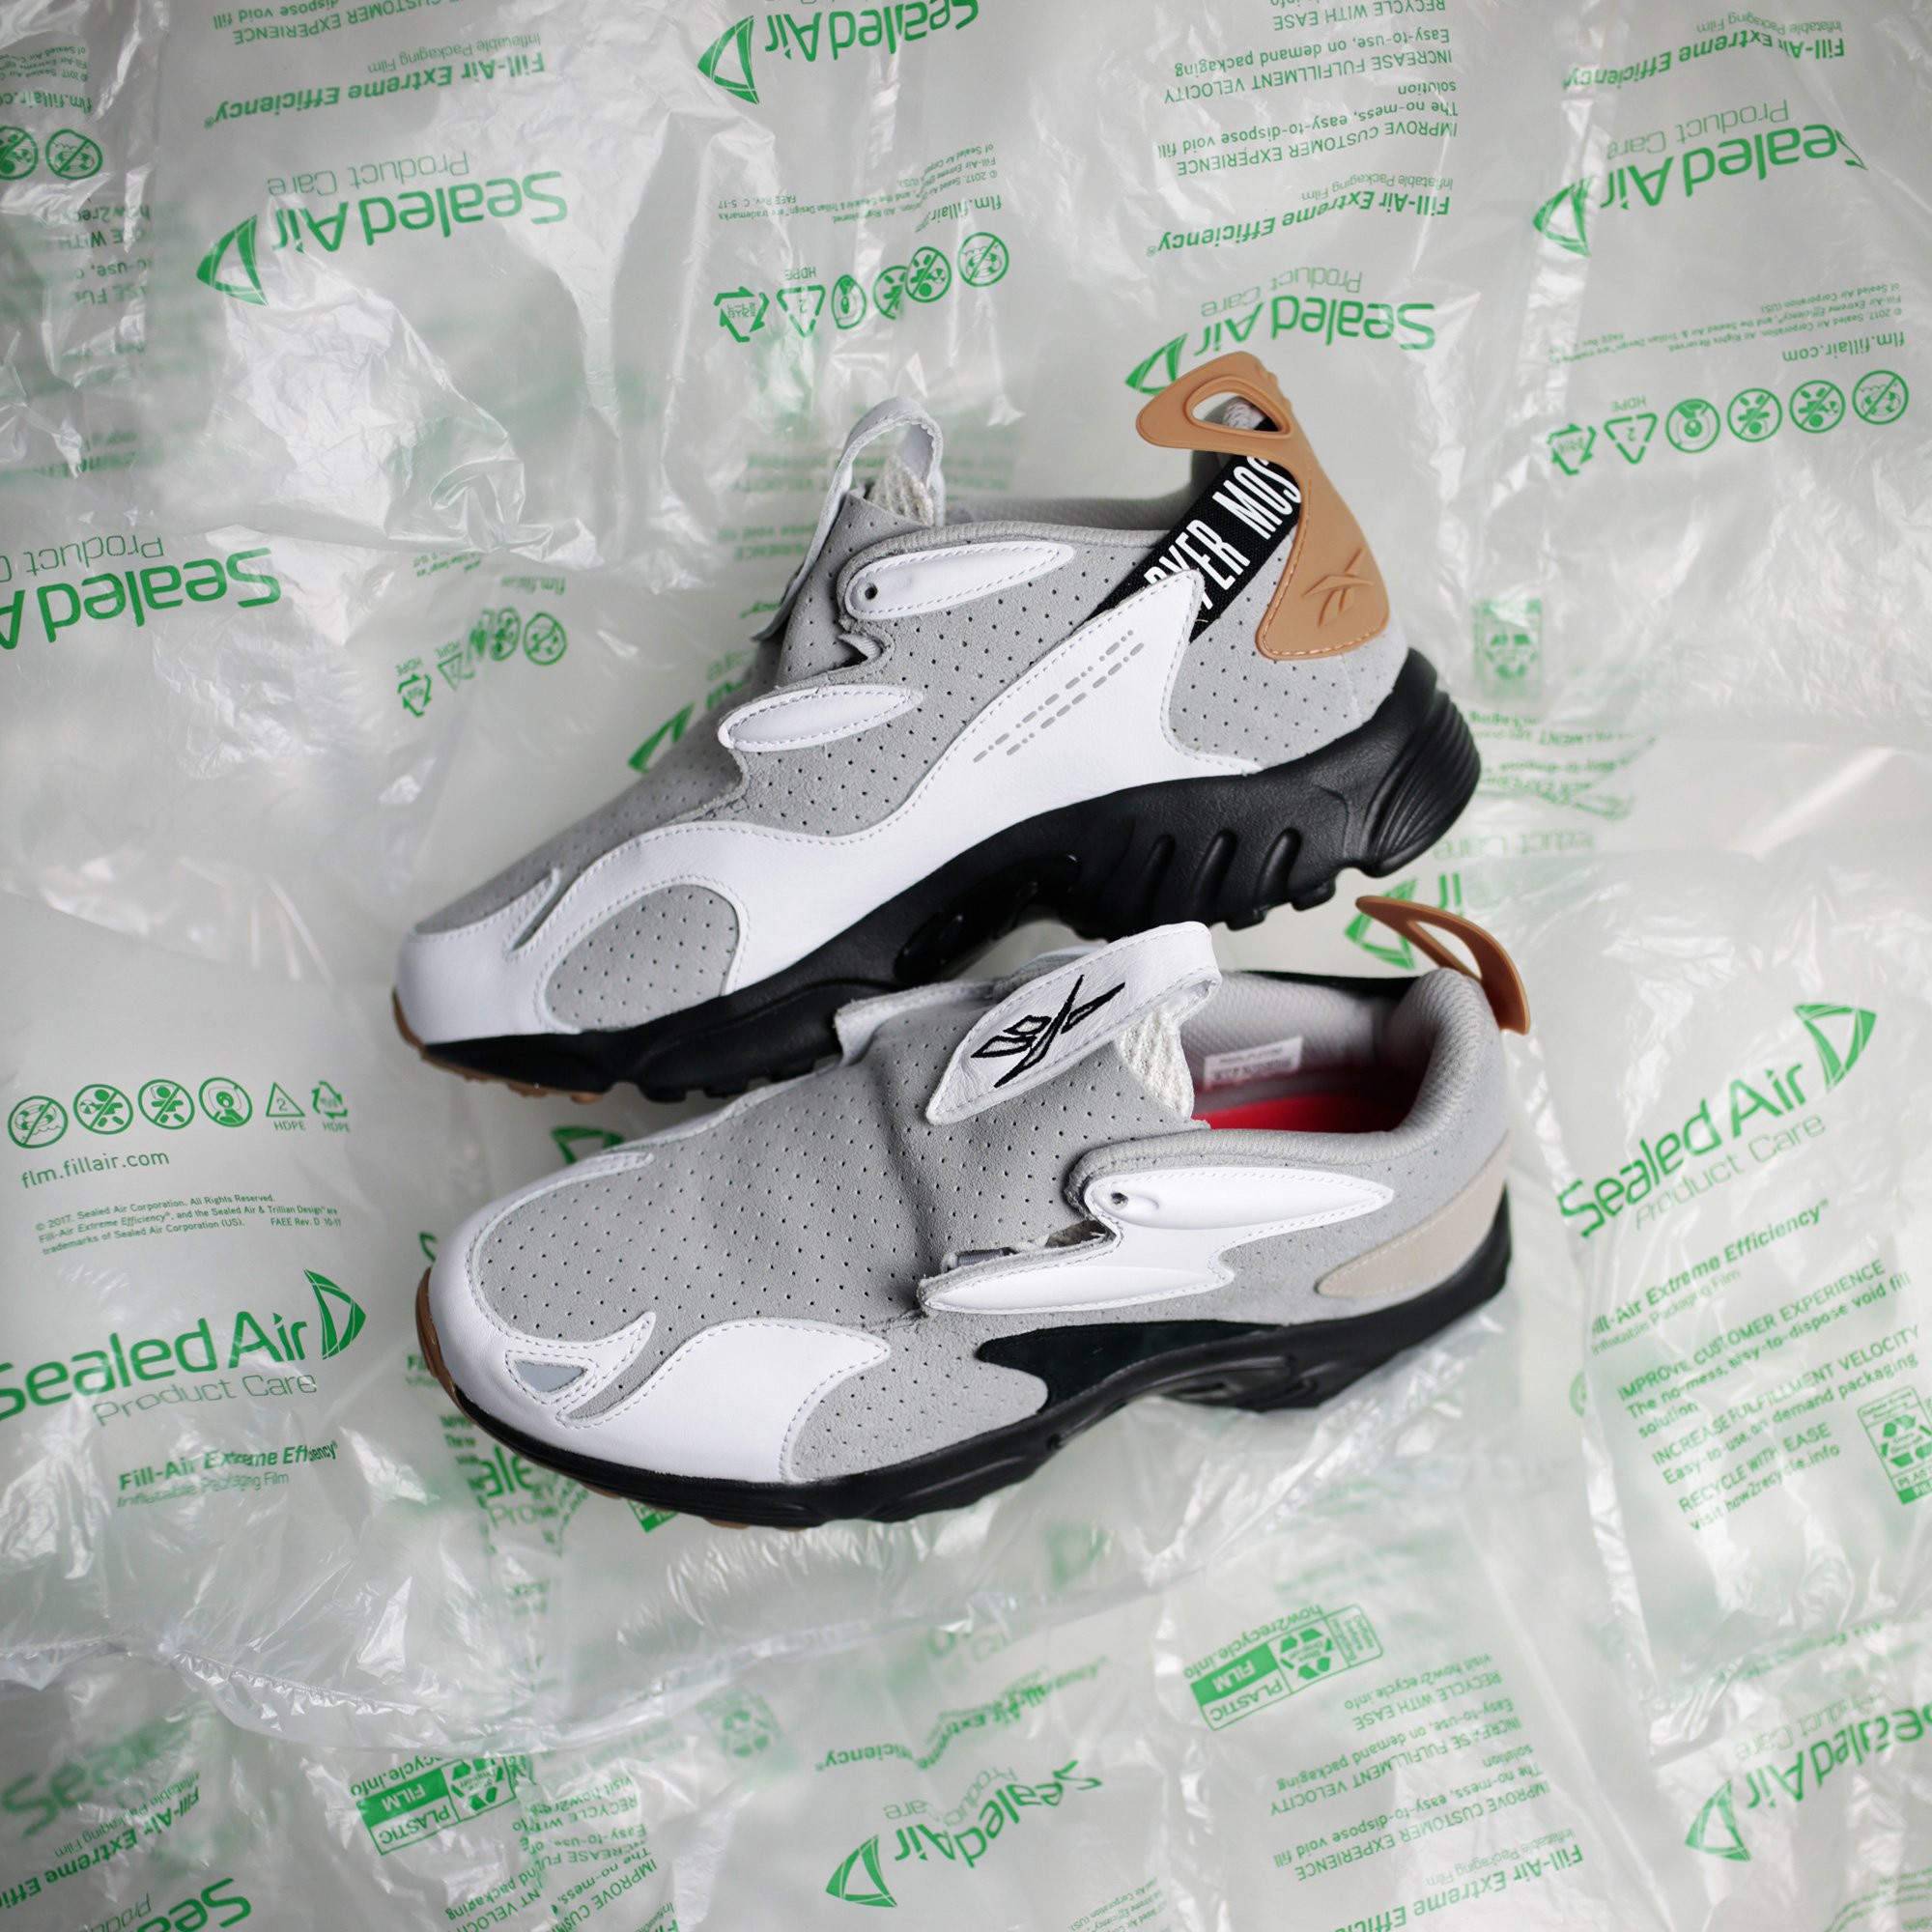 Extra Butter on Twitter: "The Reebok x Pyer Moss DMX Daytona Experiment is  now available in-store, online and via our EB App. https://t.co/vZyEHlnwI2  https://t.co/UHwSJUL0Xt" / Twitter